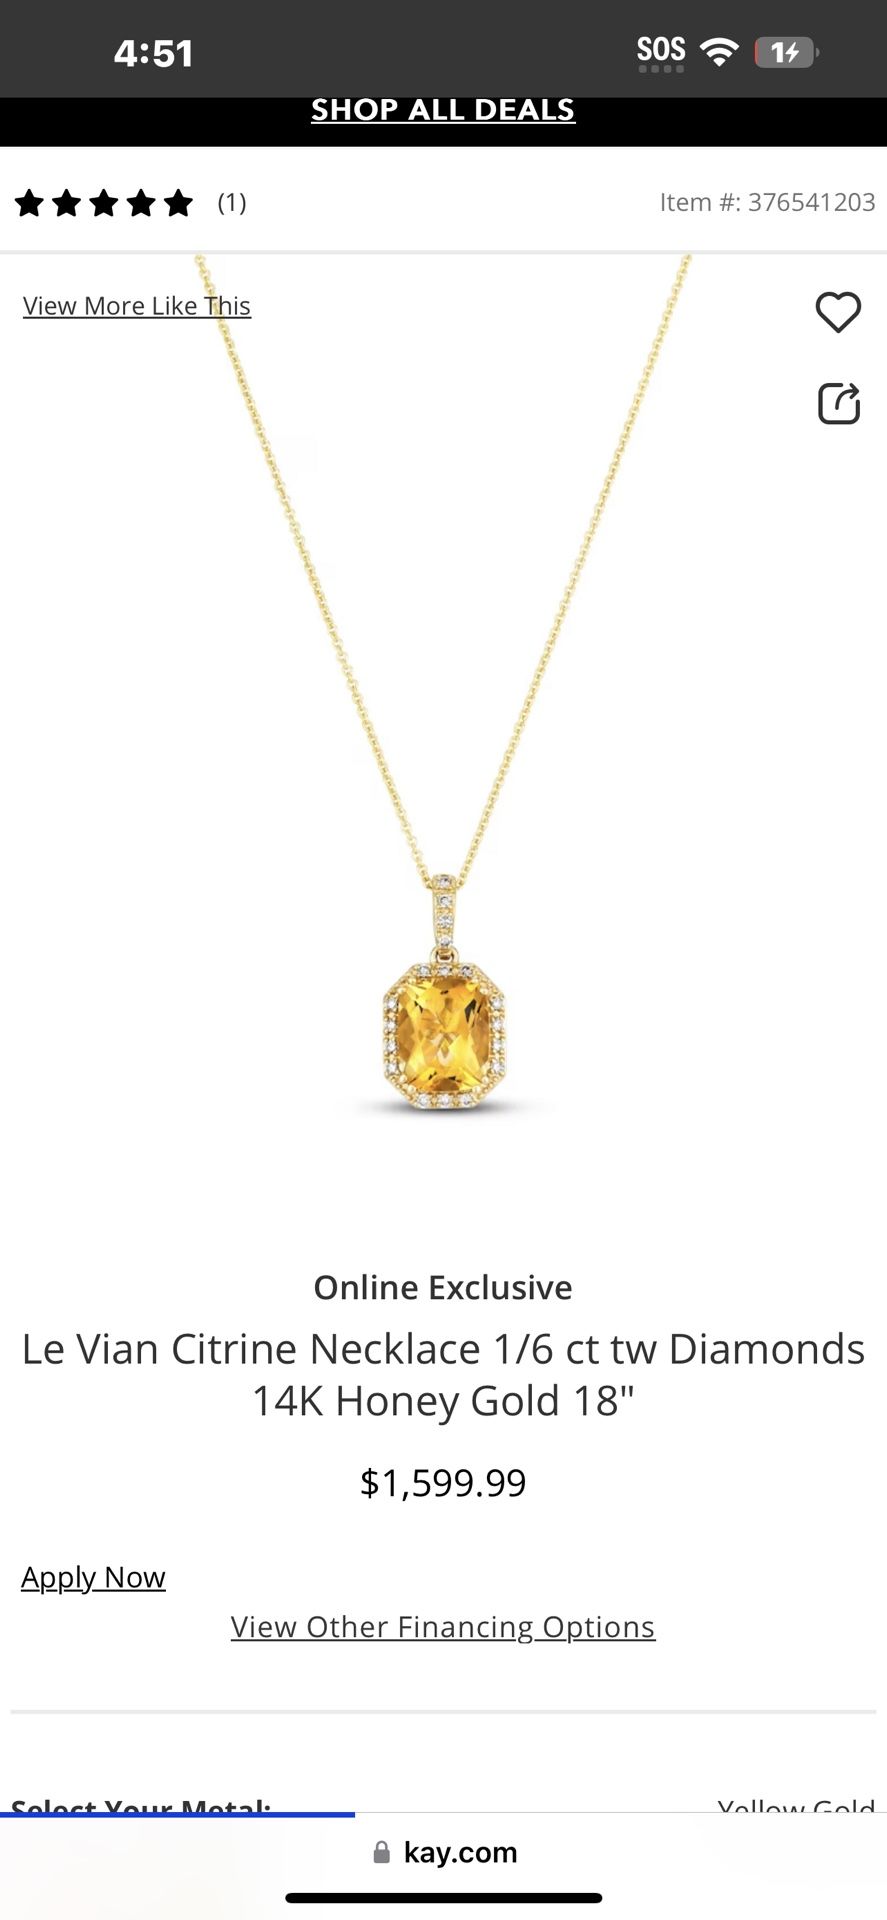 Kay Jewelers Le’Vain Citrine Necklace 1/6 ct tw Diamonds 14k Honey Gold 18” Comes With Thicker Chain Than The One In Photo